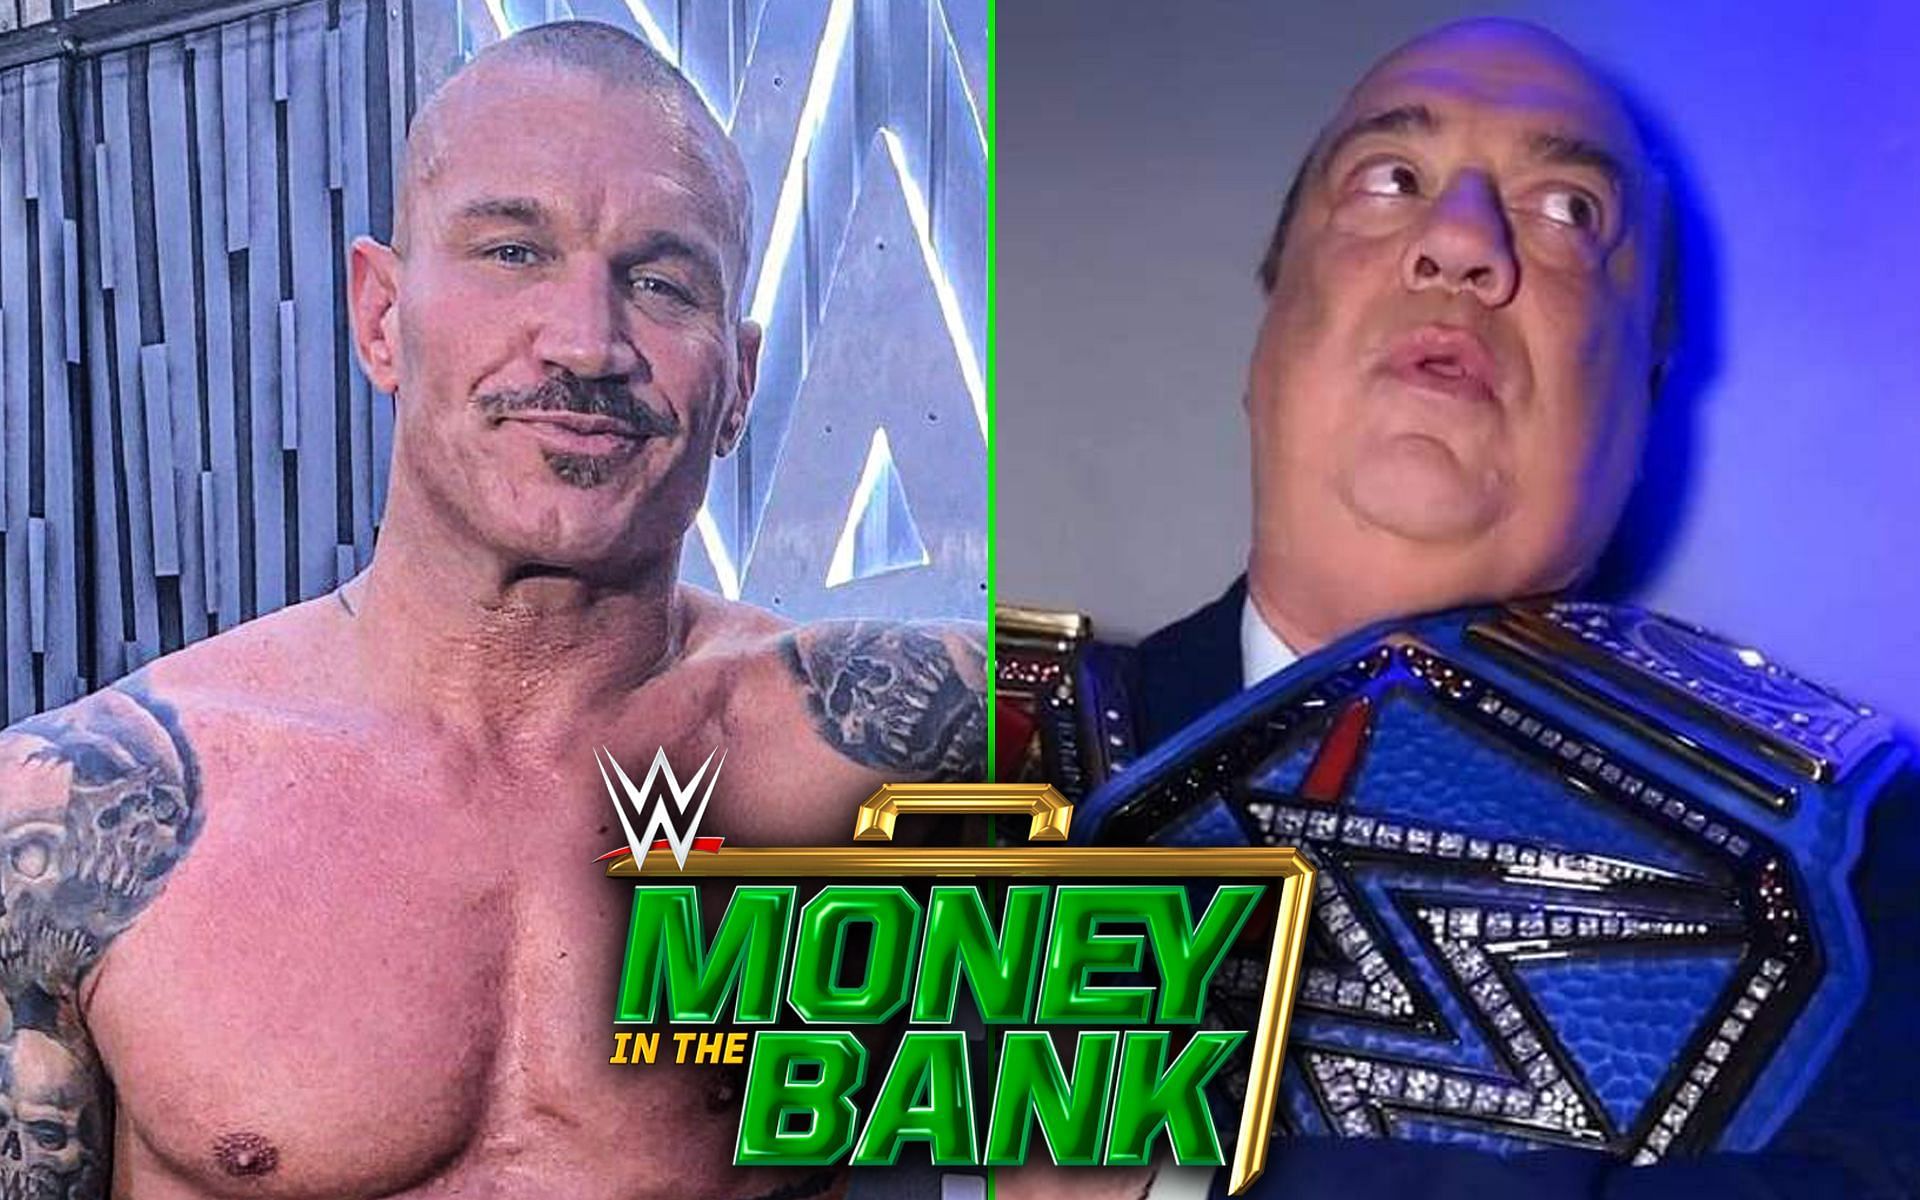 Money in the Bank 2023 will include potential multiple surprises